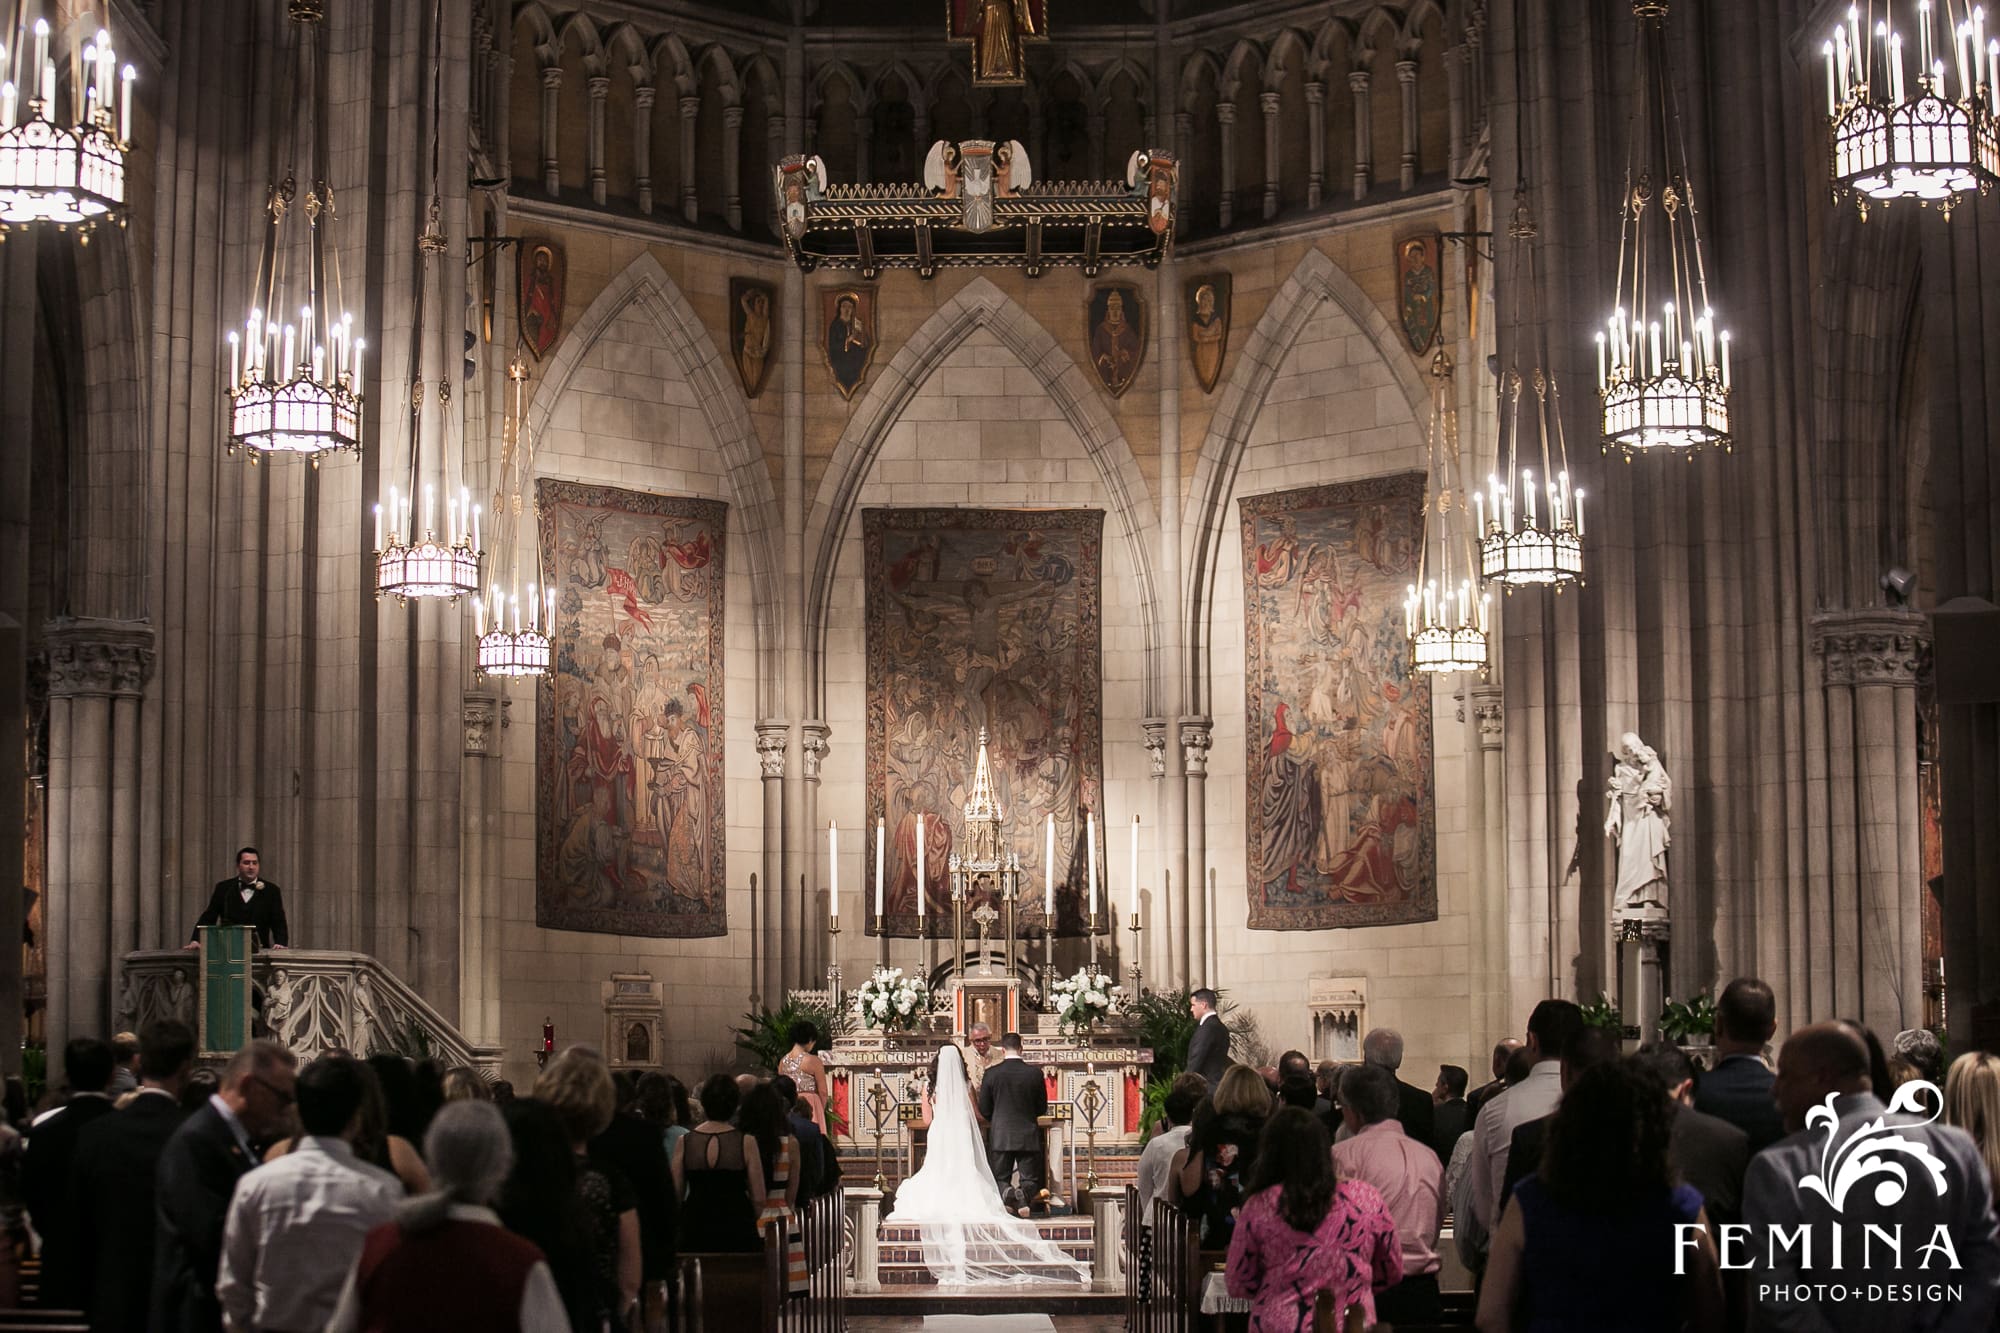 Ryan and Christina kneeling at the alter during their ceremony at Church of the Blessed Sacrament in NYC